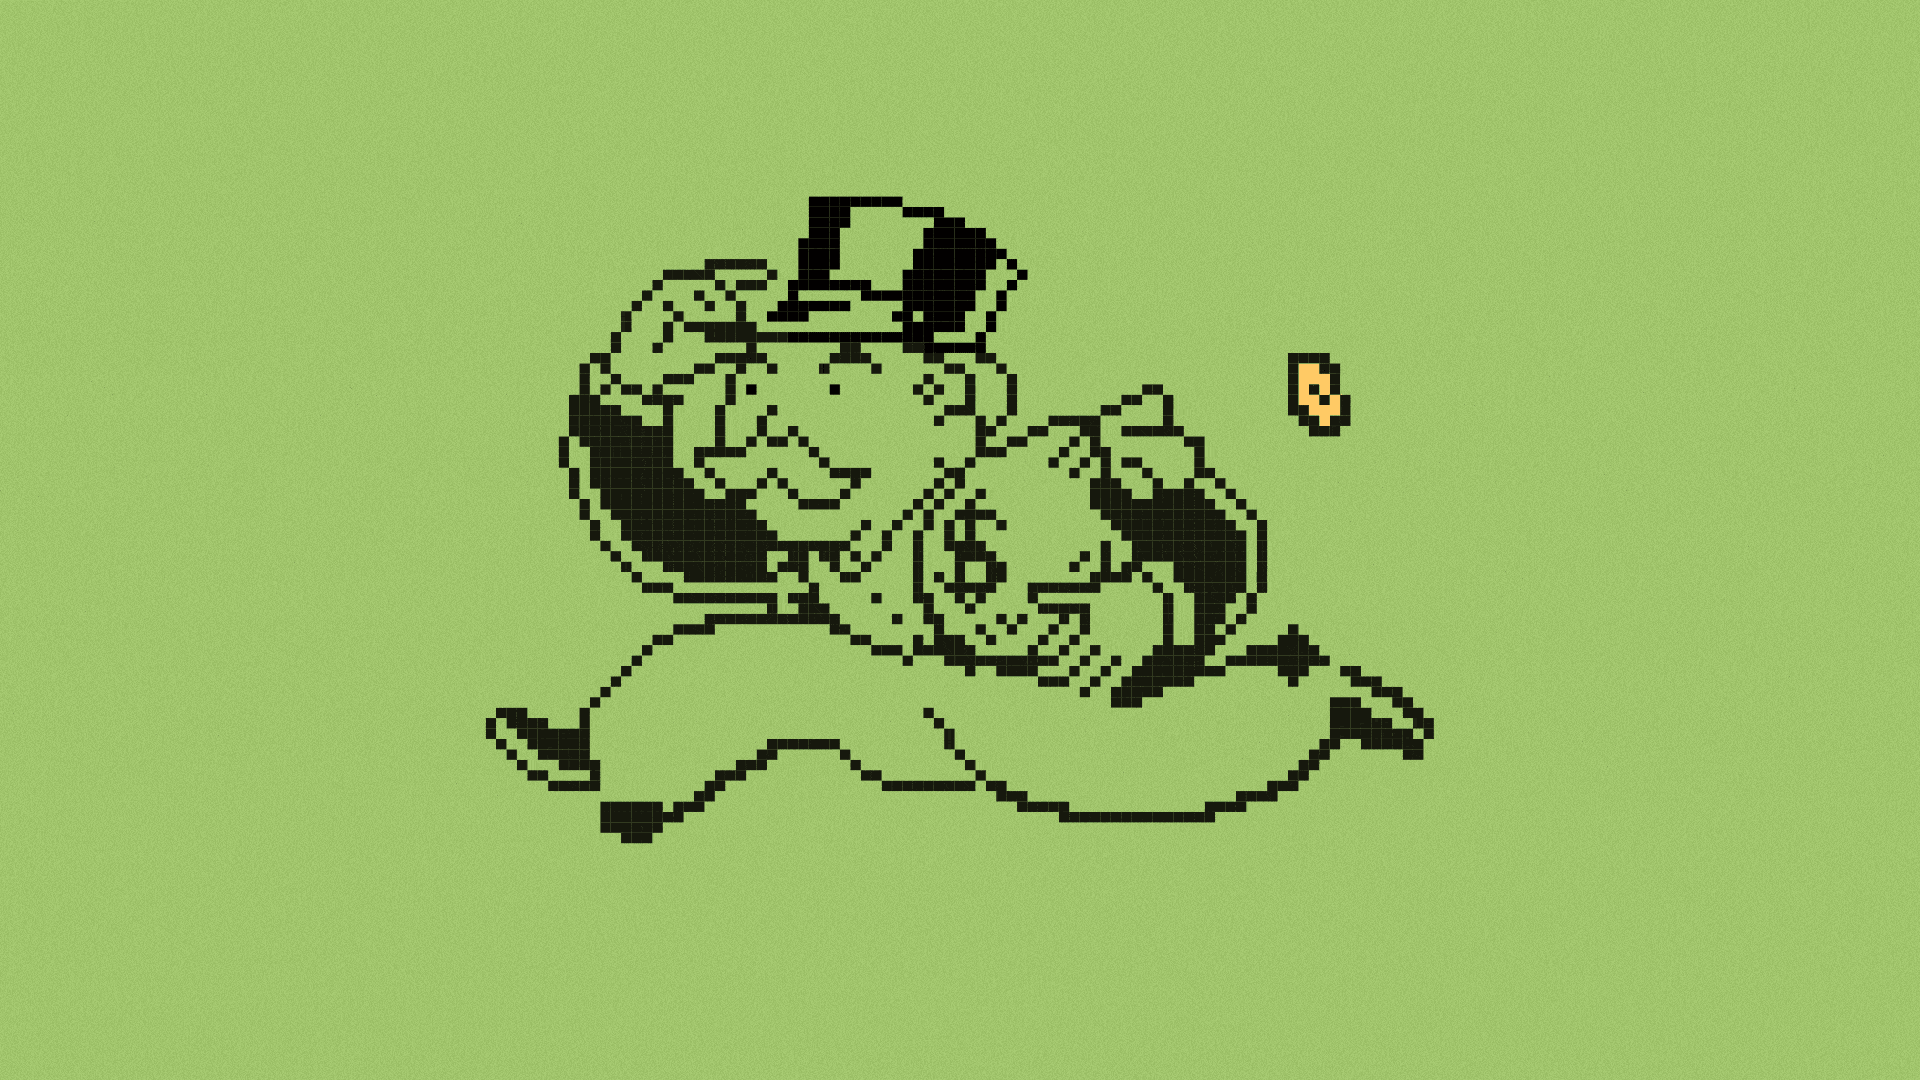 Animated illustration of an 8-bit Rich Uncle Pennybags (from the game Monopoly) running, coins are flying from his money bag